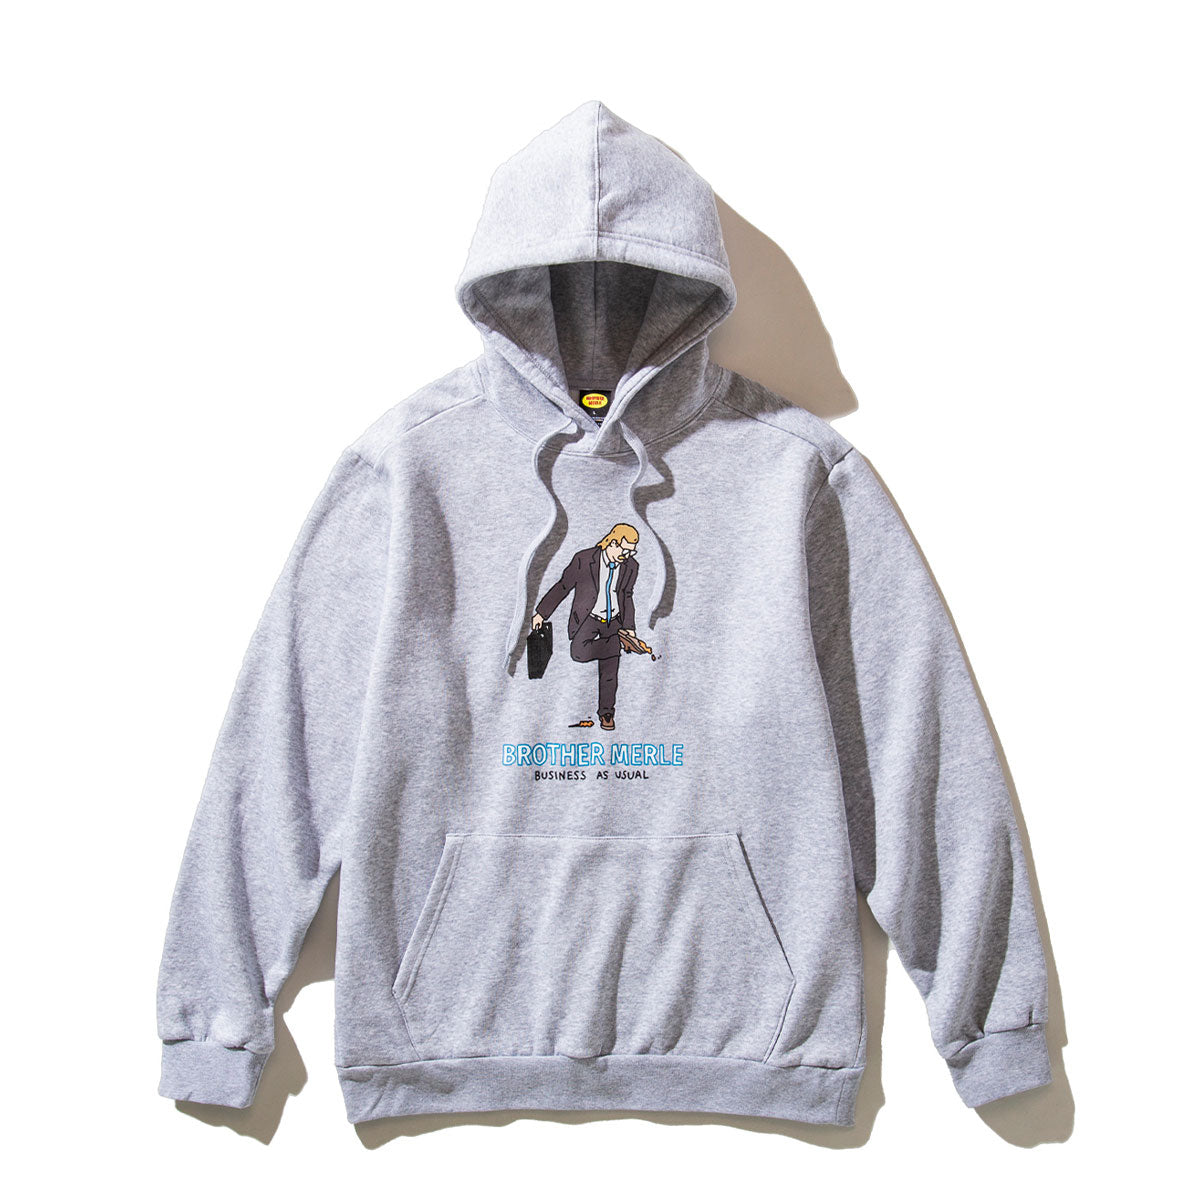 Knit Hooded Pullover - Business As Usual